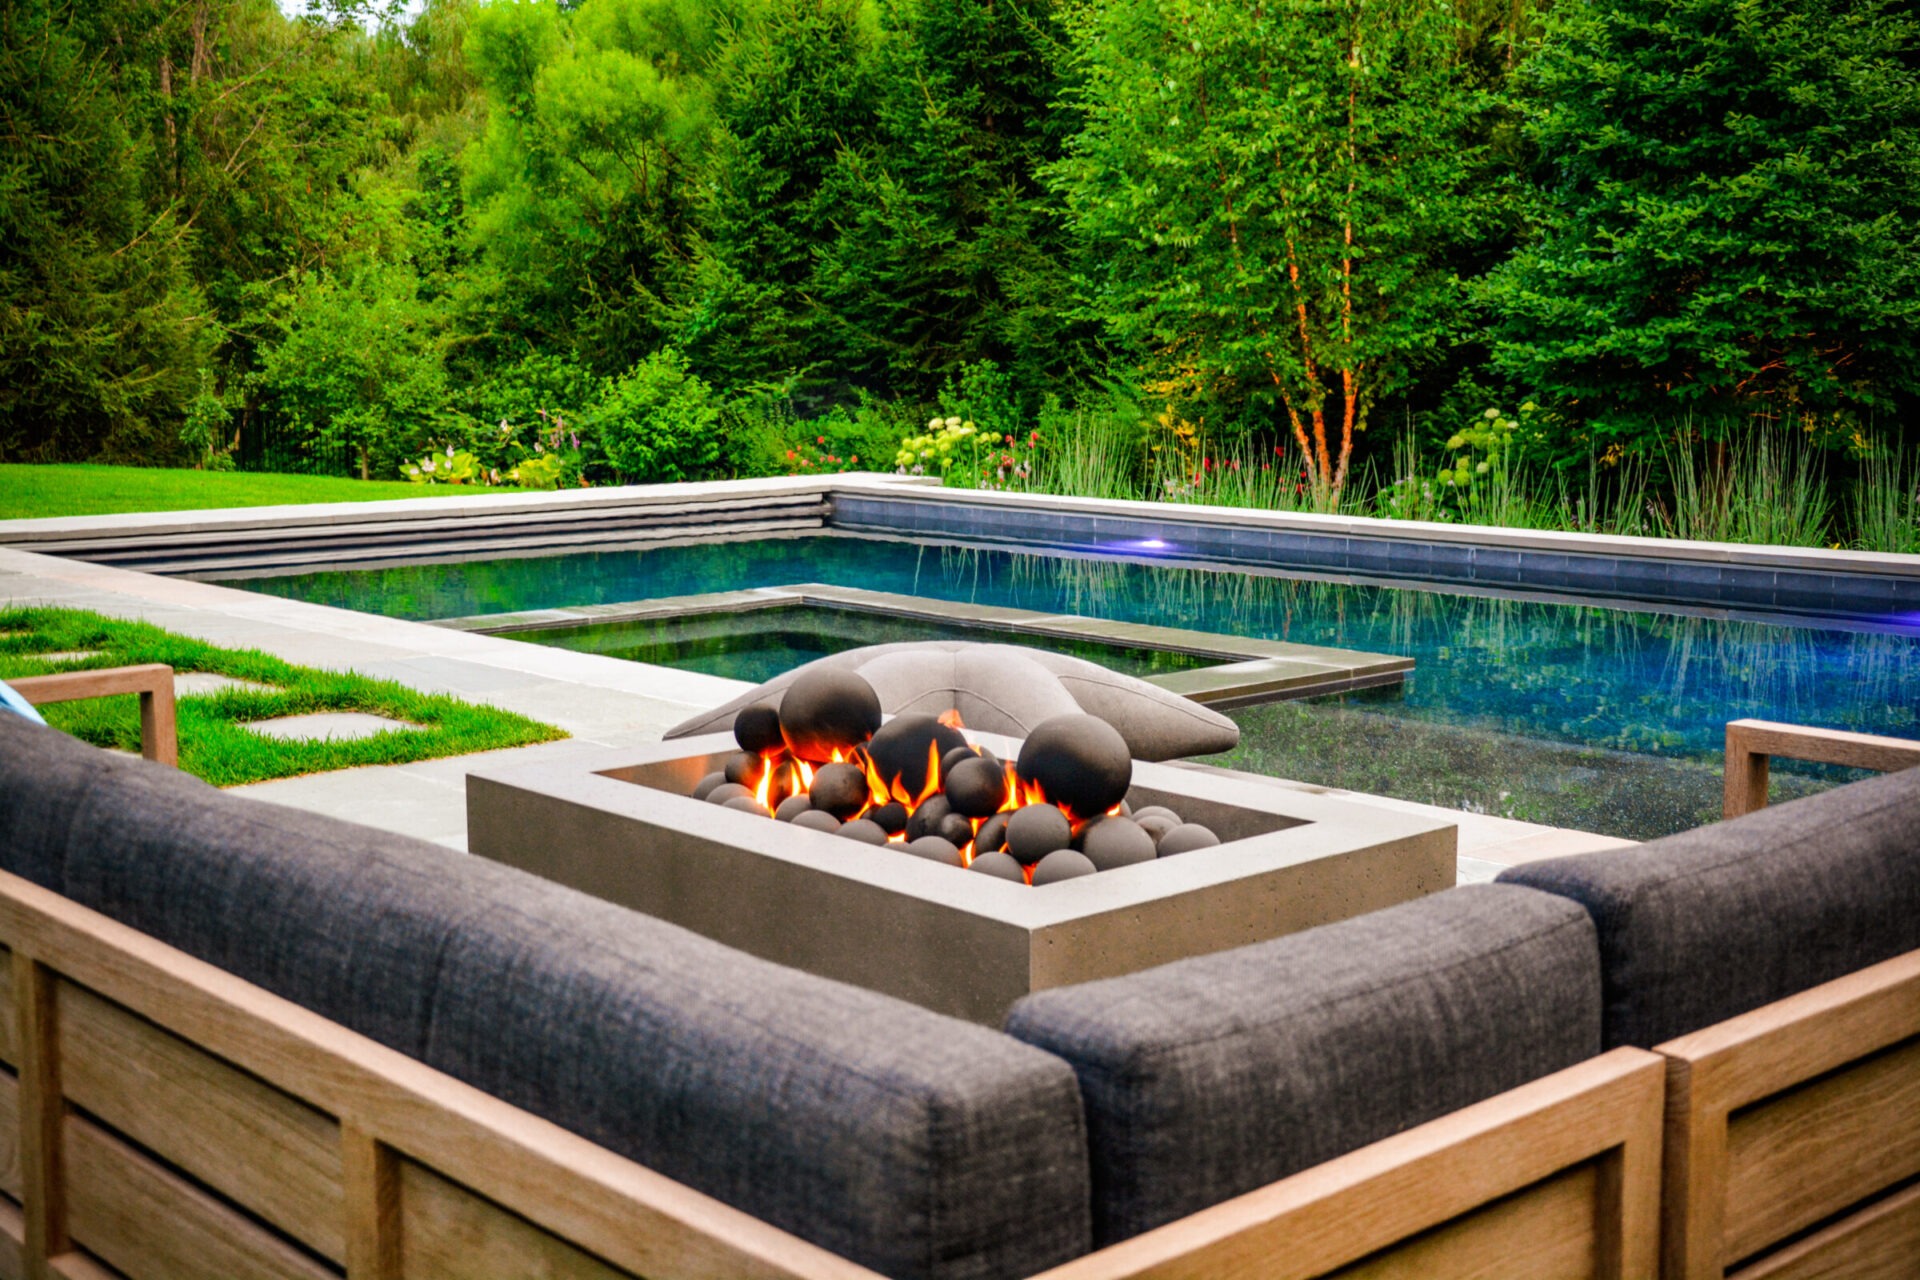 An outdoor fire pit with a flame lit, surrounded by sleek furniture overlooking a calm swimming pool set against a backdrop of lush greenery.